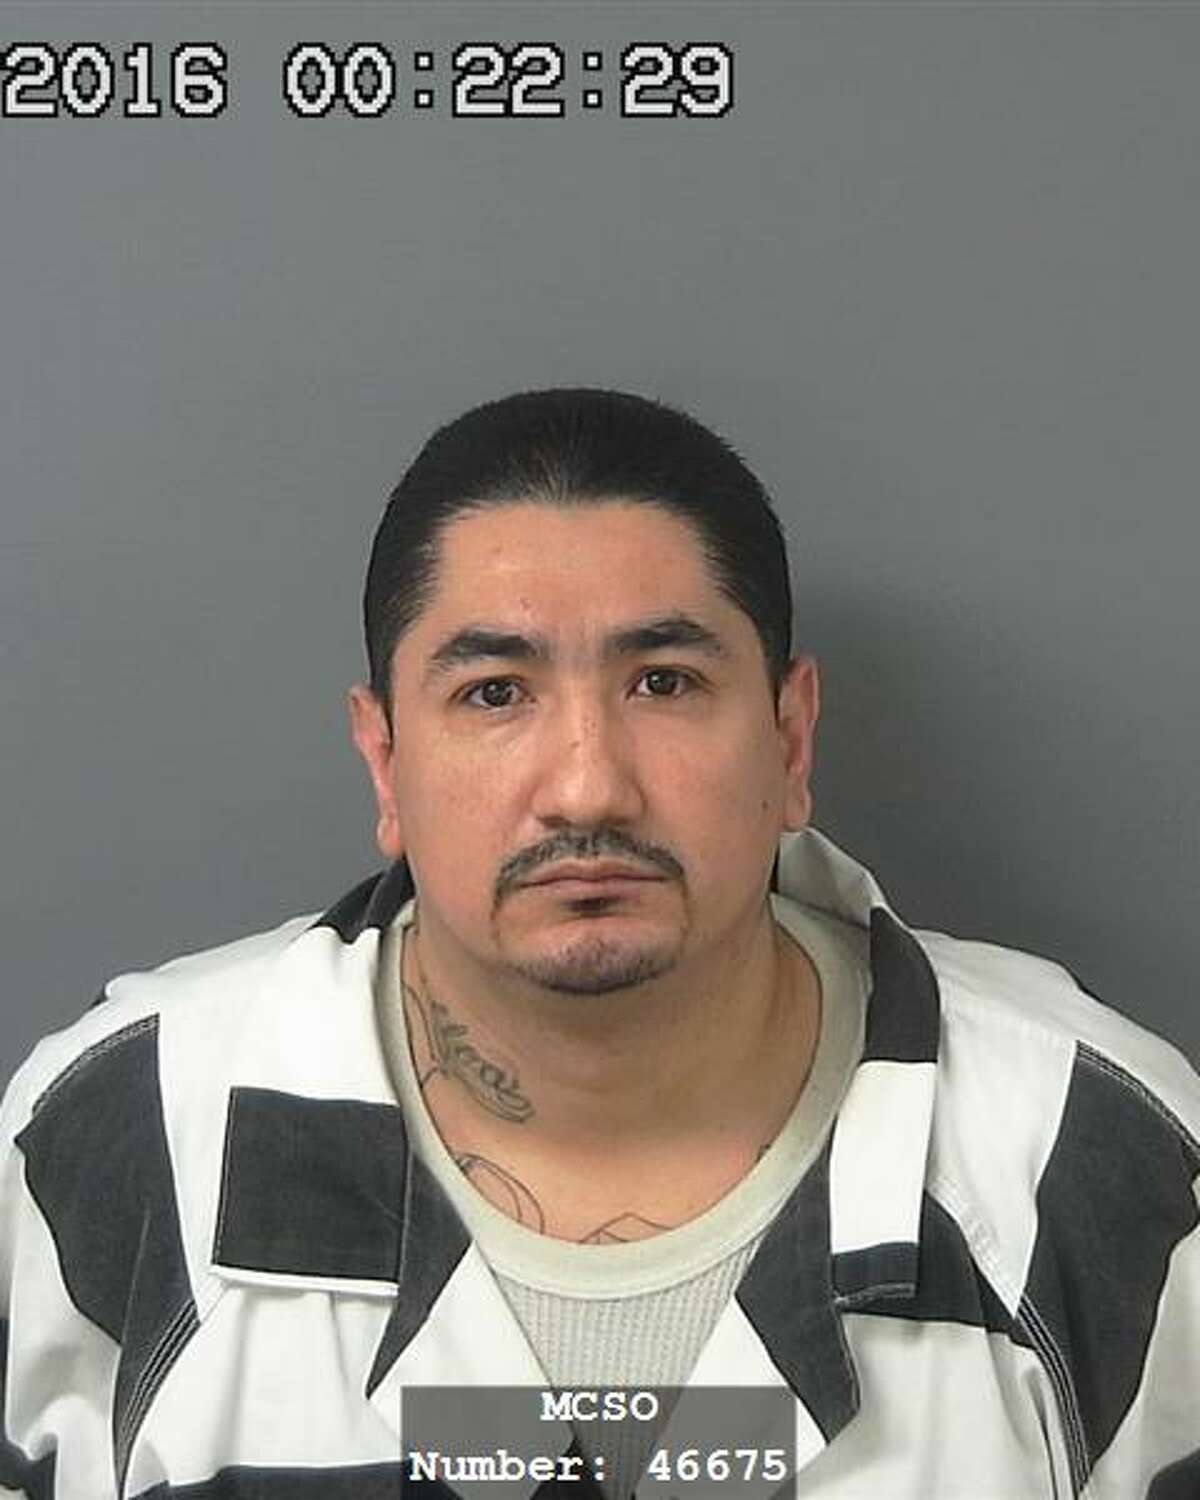 Mike Ulloa is now charged with murder in the 2009 death of his wife. PHOTOS: People charged with murder so far this year in the Houston area